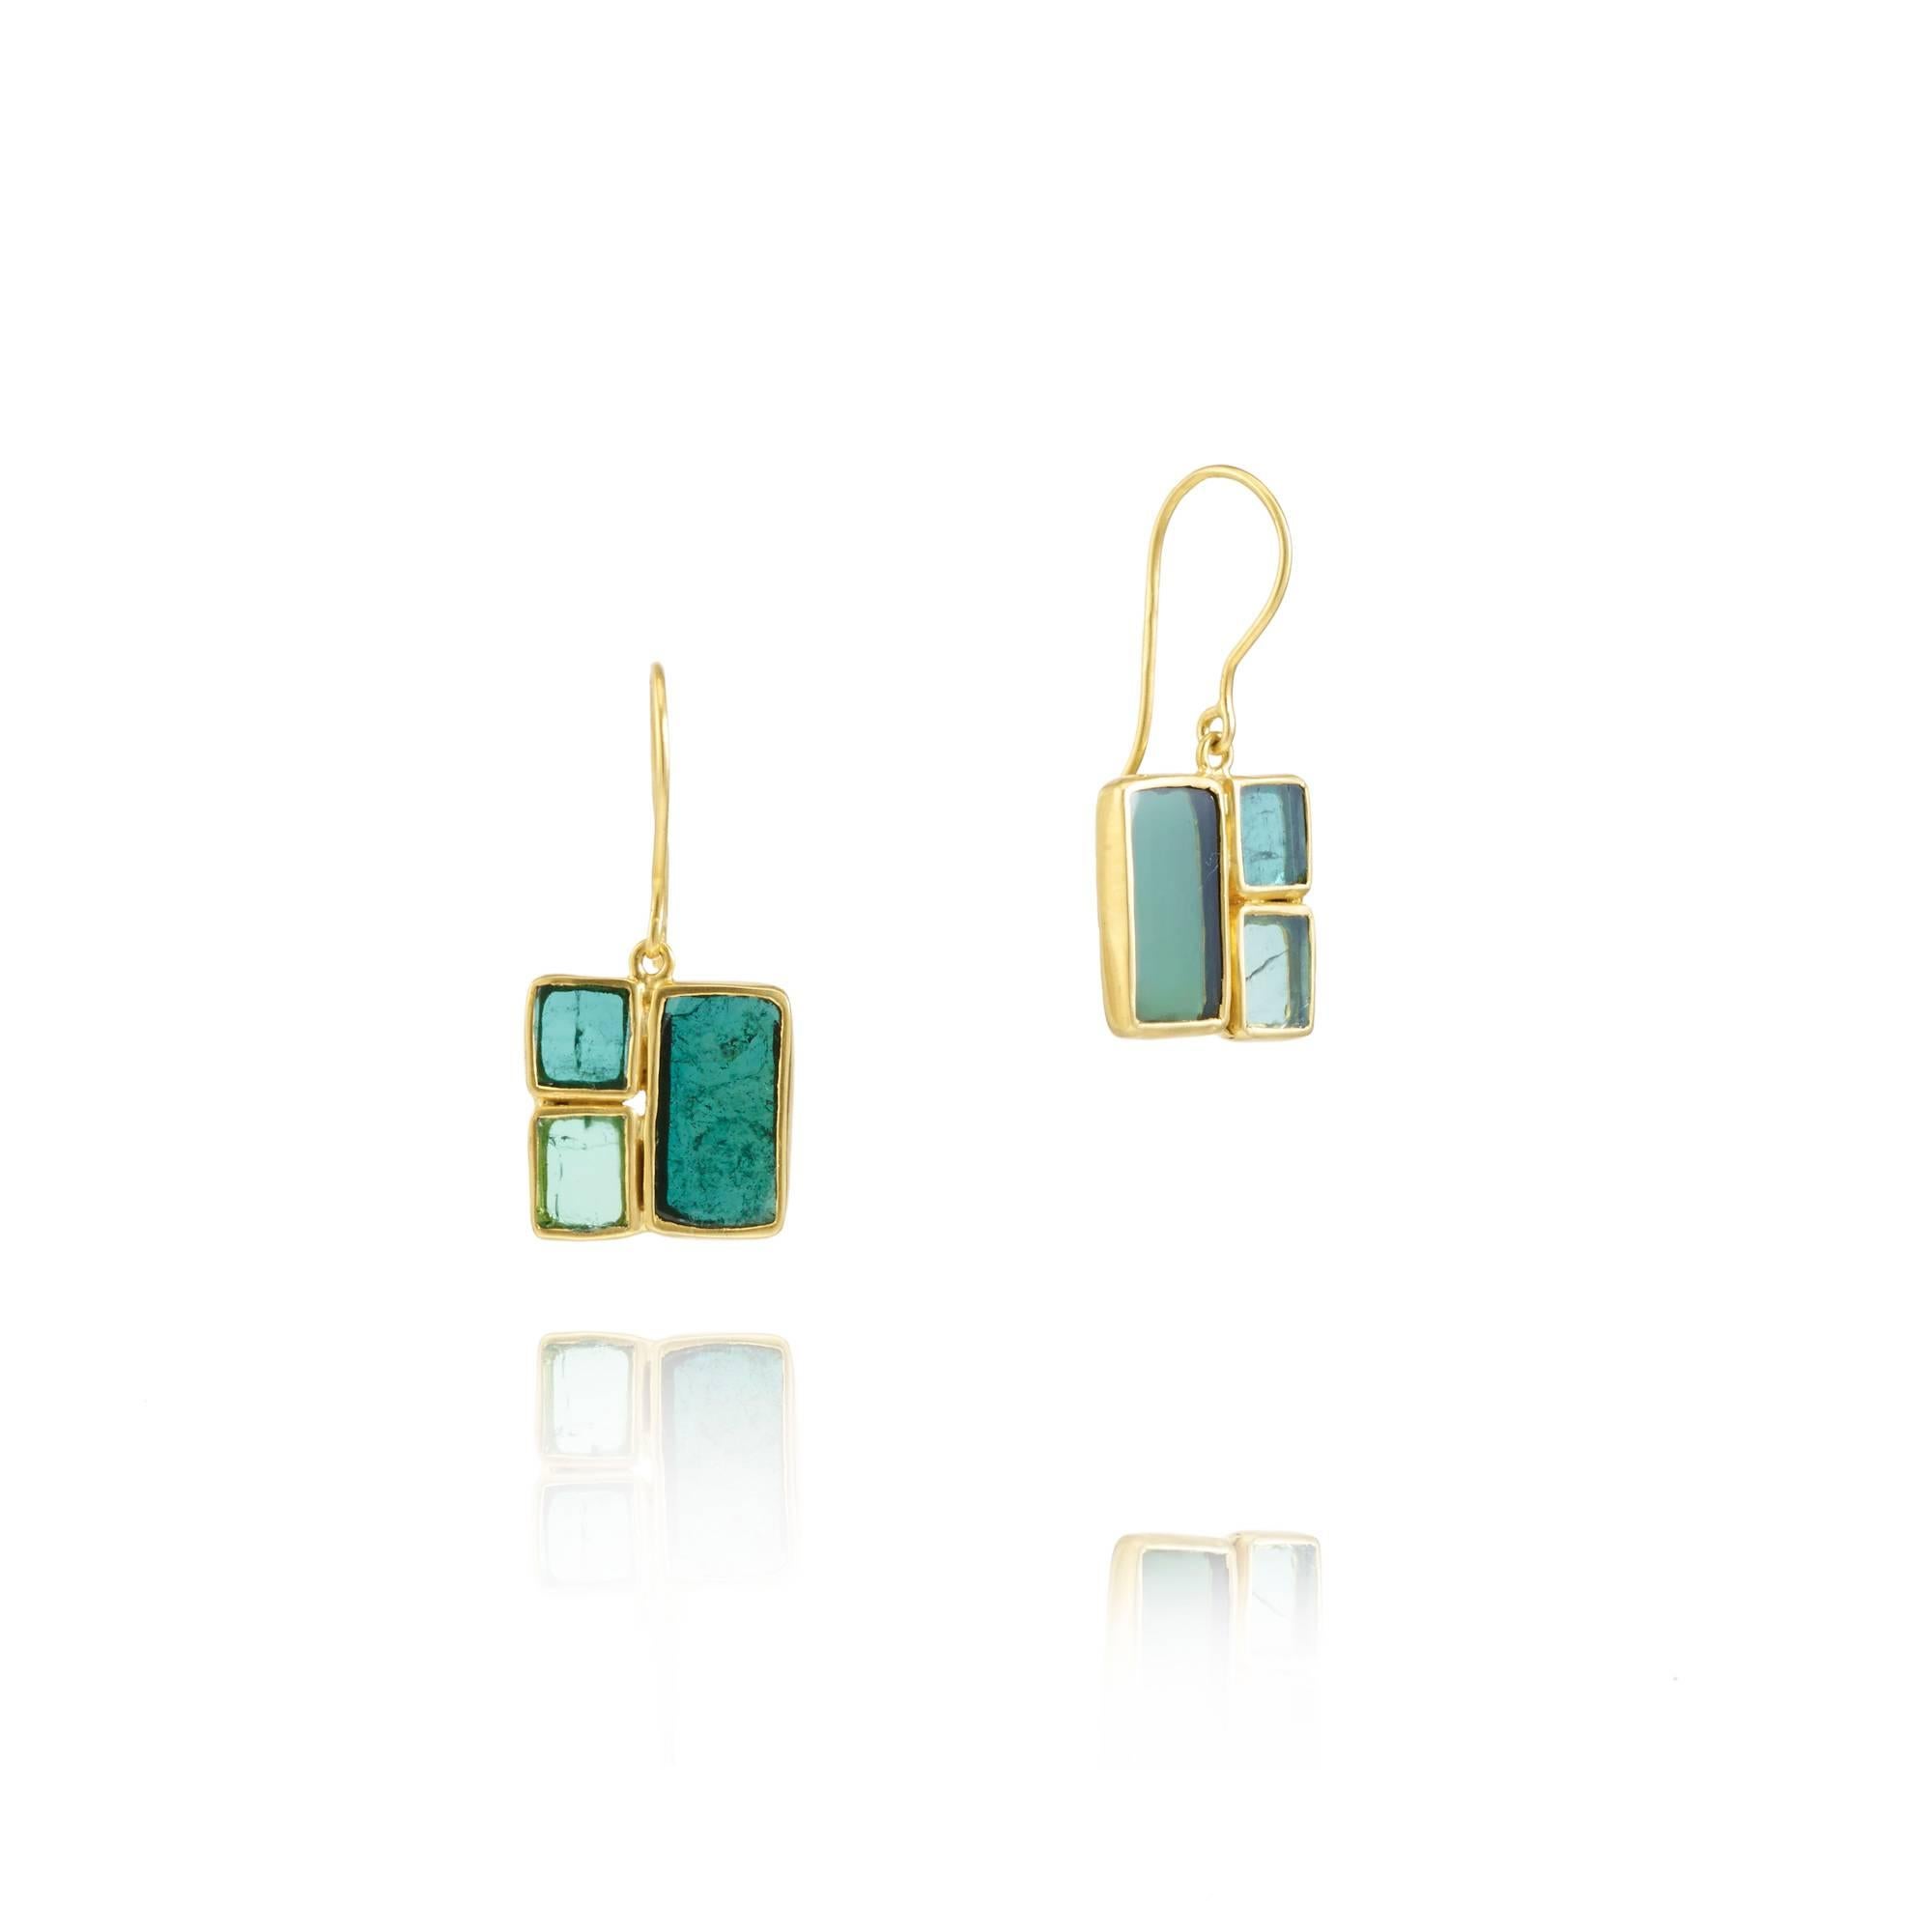 Inspired by the renowned painter's works, the Mondrian earrings feature luminous Green Tourmalines seductively set in an 18kt Gold setting.